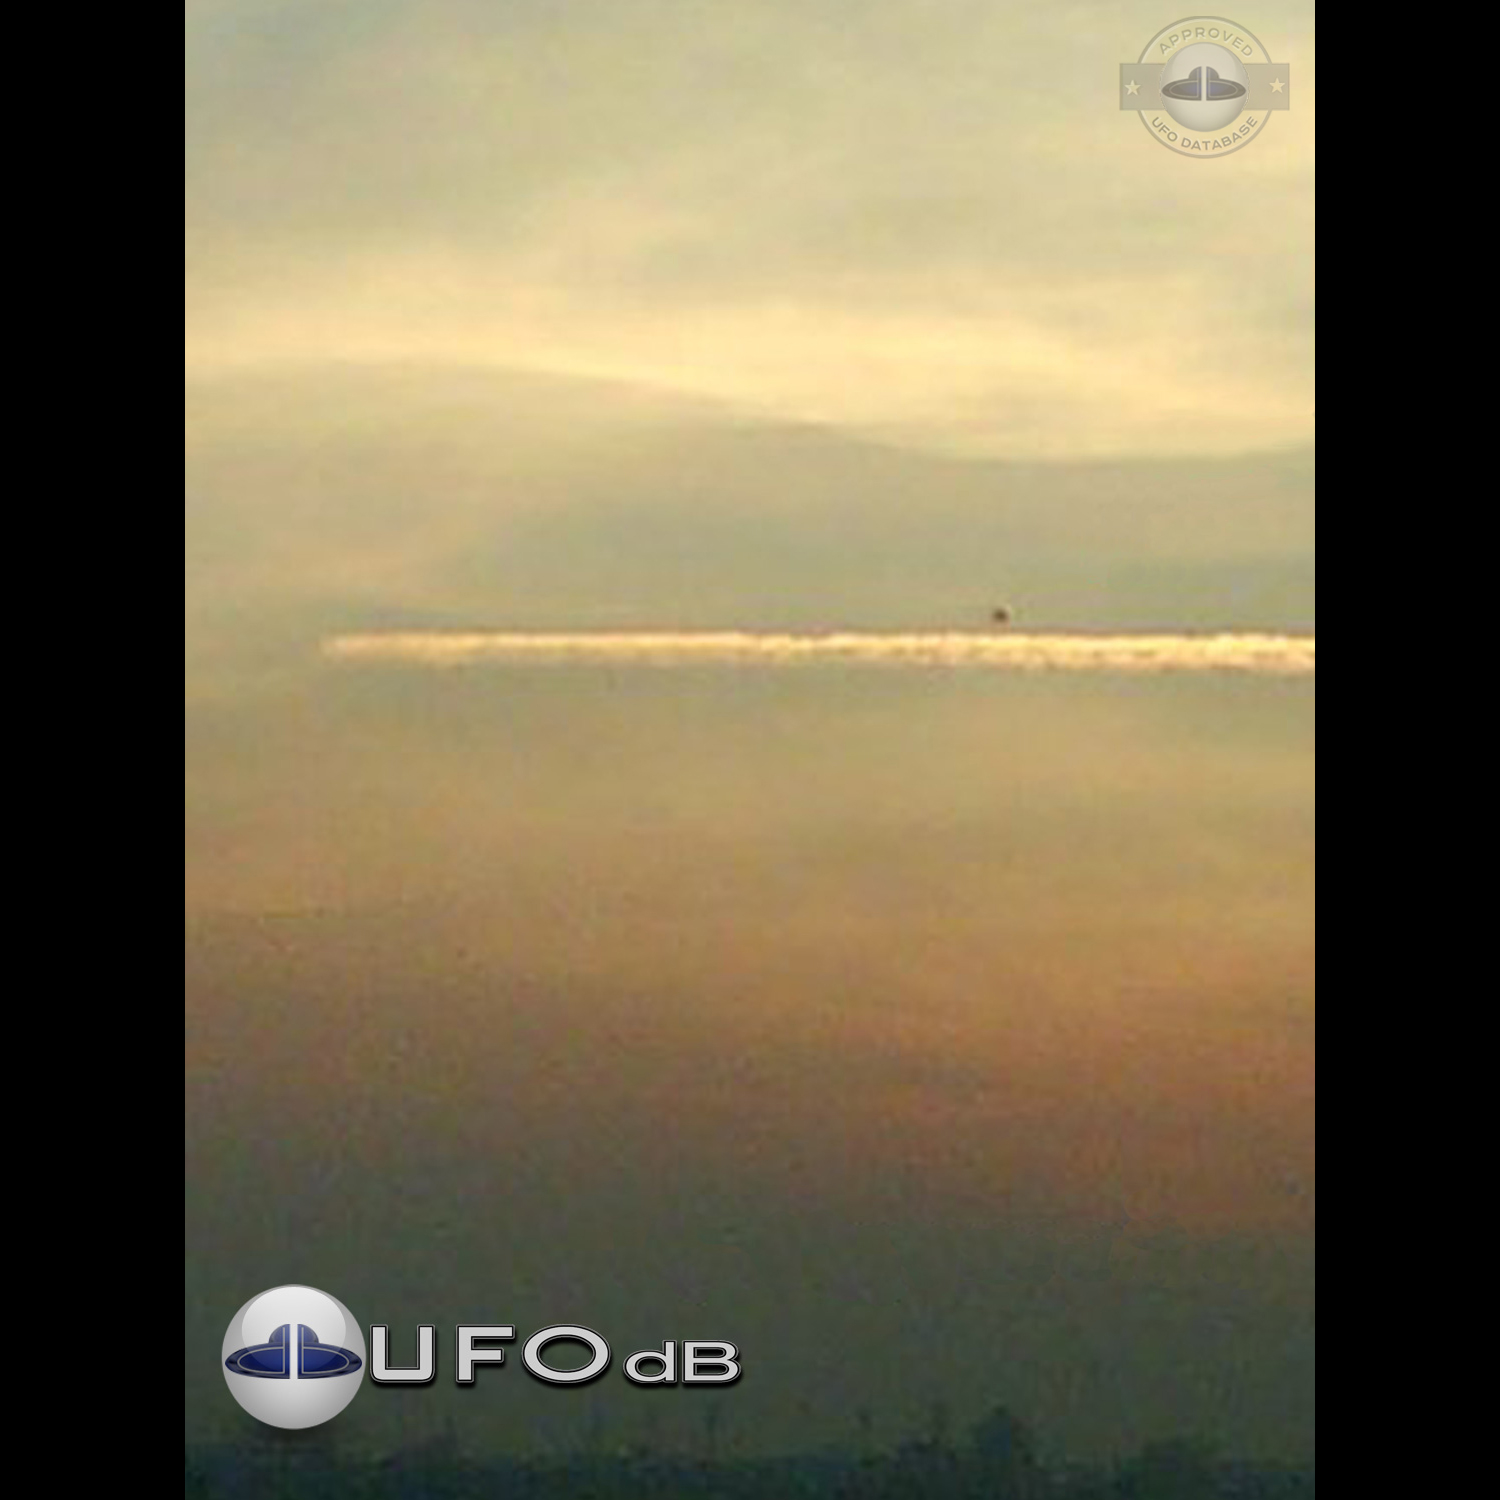 UFO near jet smoke line | Hyderabad India UFO picture September 2008 UFO Picture #170-1